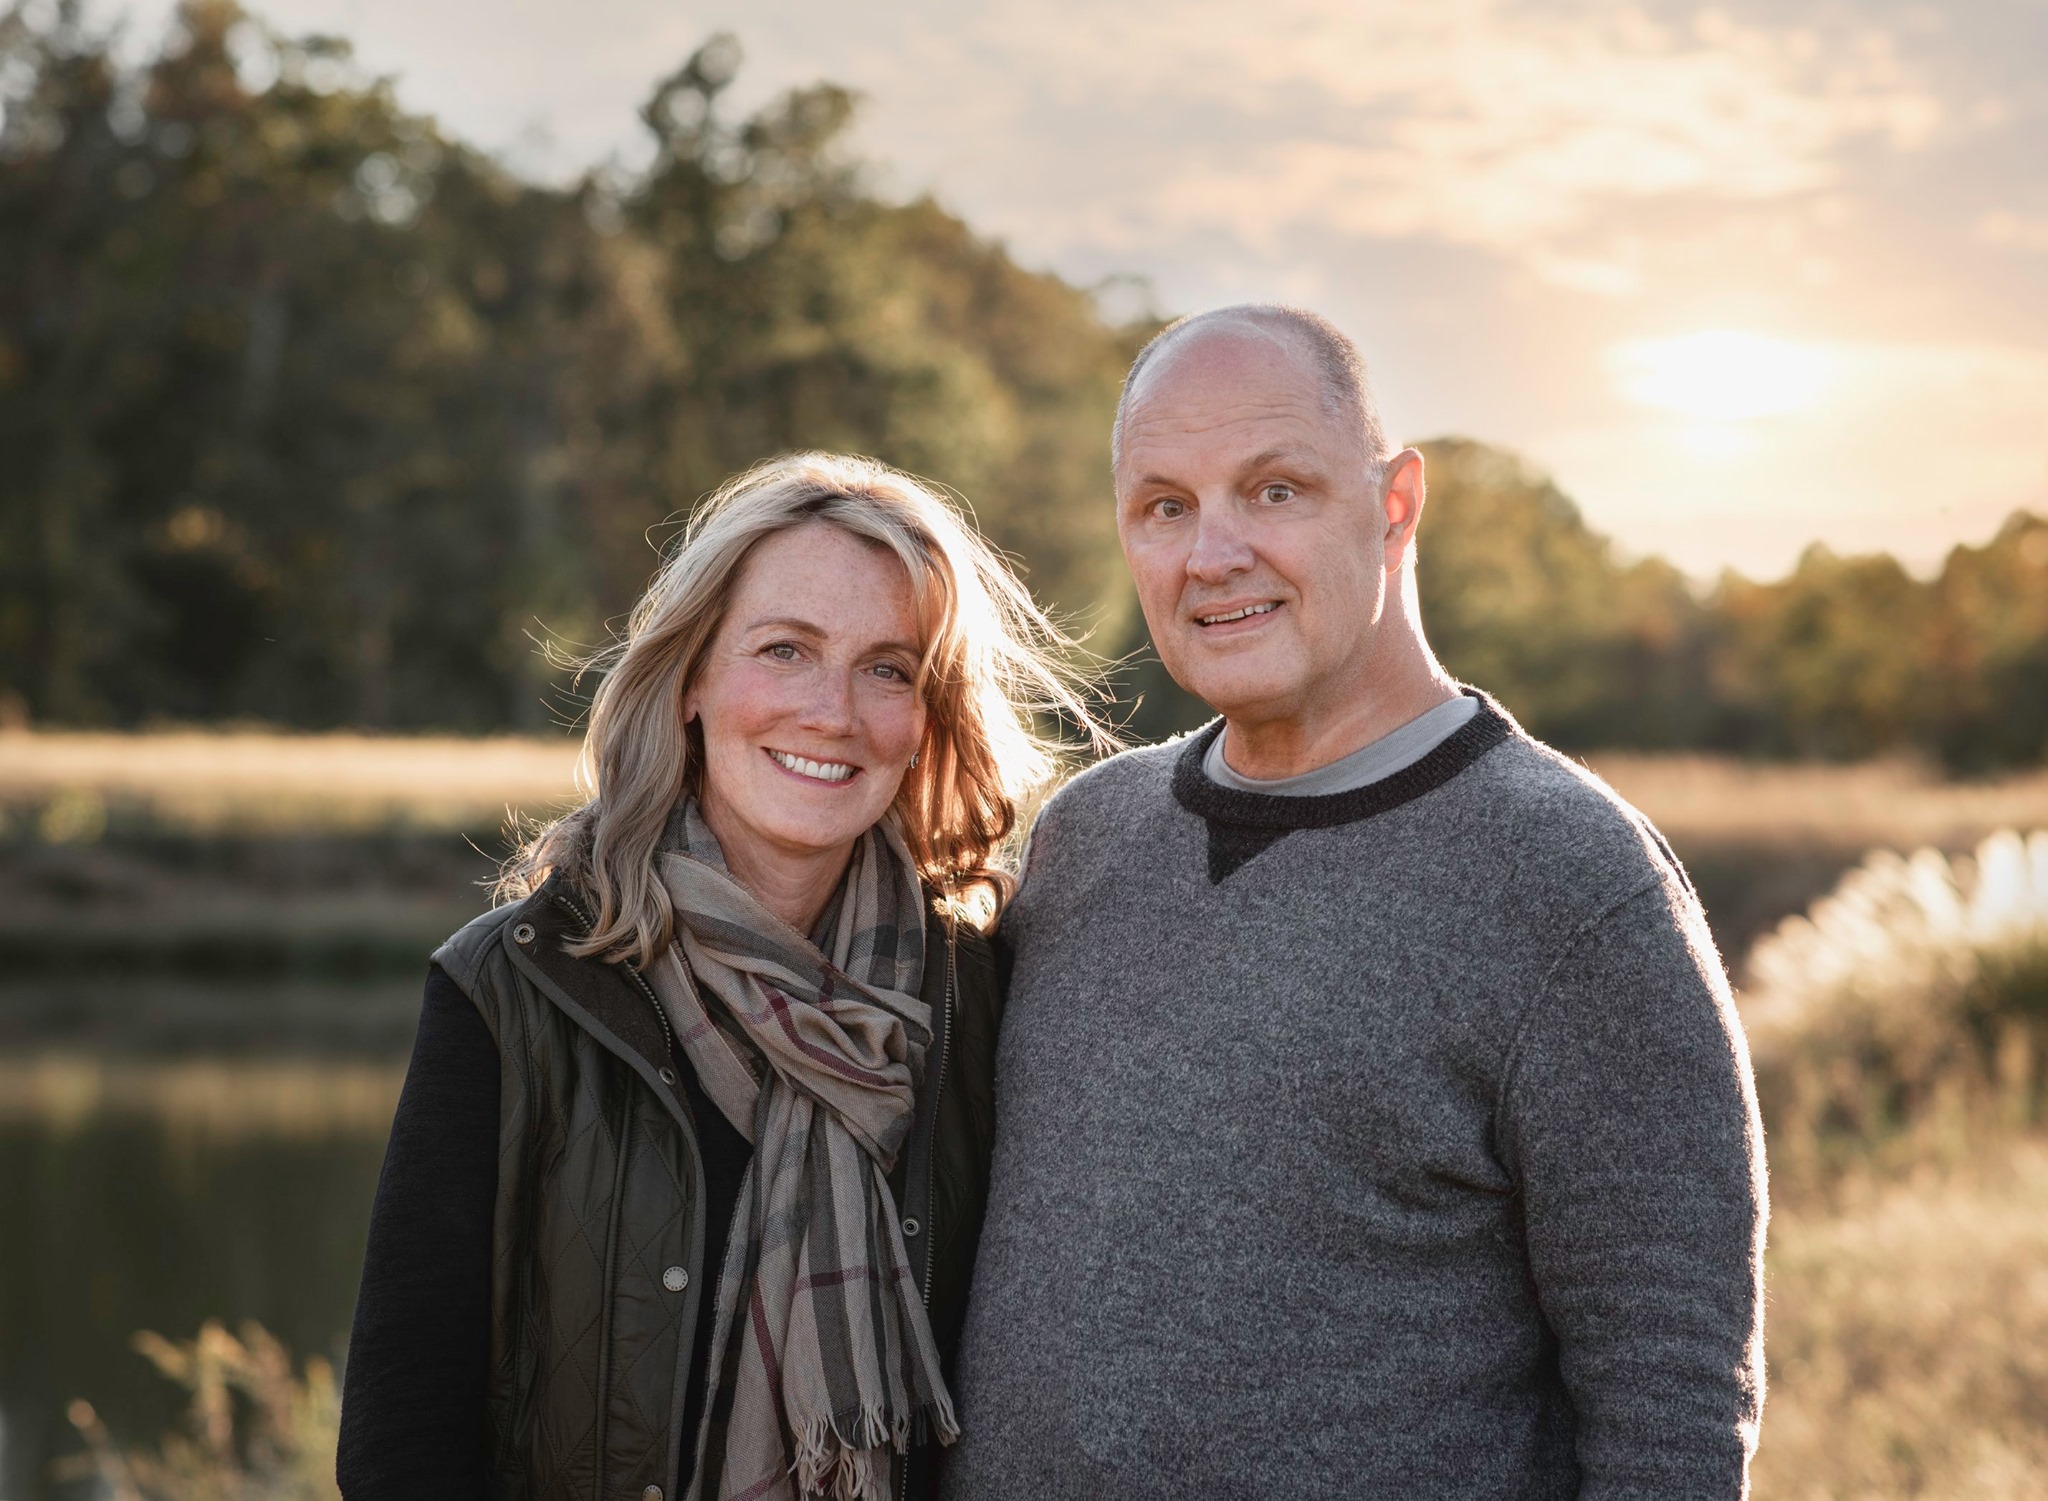 Jeff Sarnacki and his wife Juliet in November 2019, a year after Jeff was diagnosed with ALS. [Credit: Theresa Marlowe of Alfheim Photography]